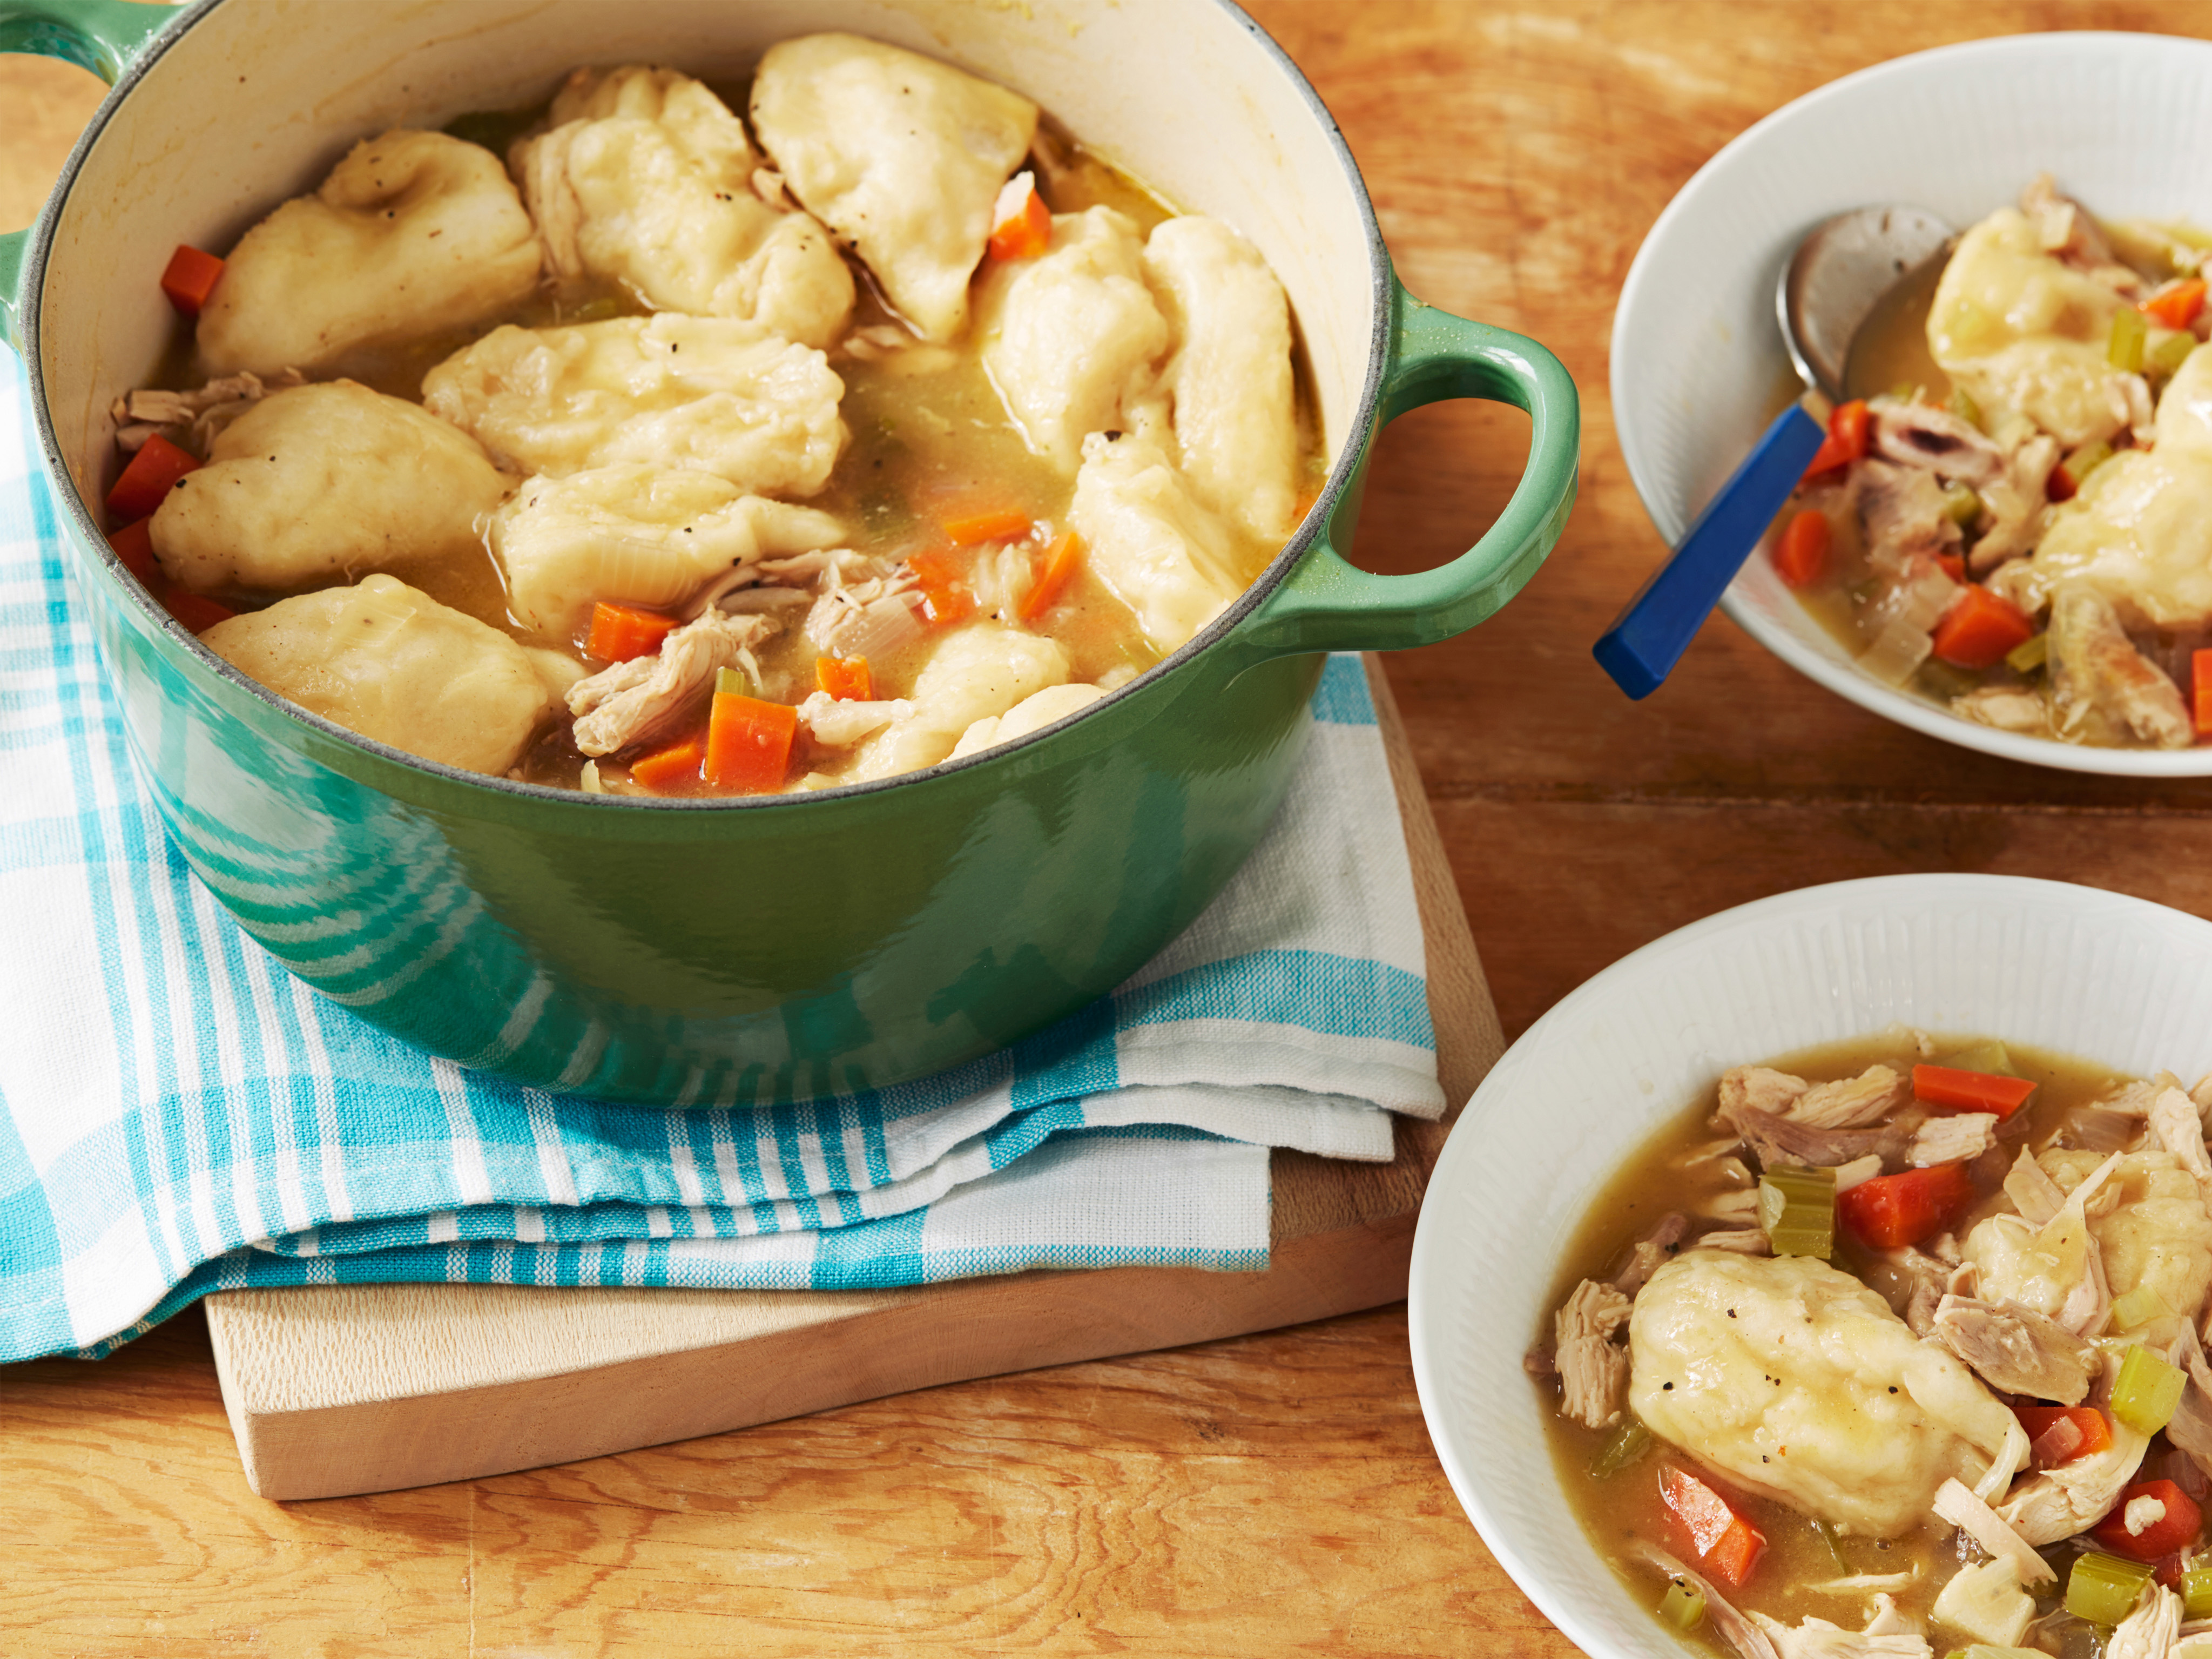 Super Easy Homemade Chicken and Dumplings Recipe - Eat at Home